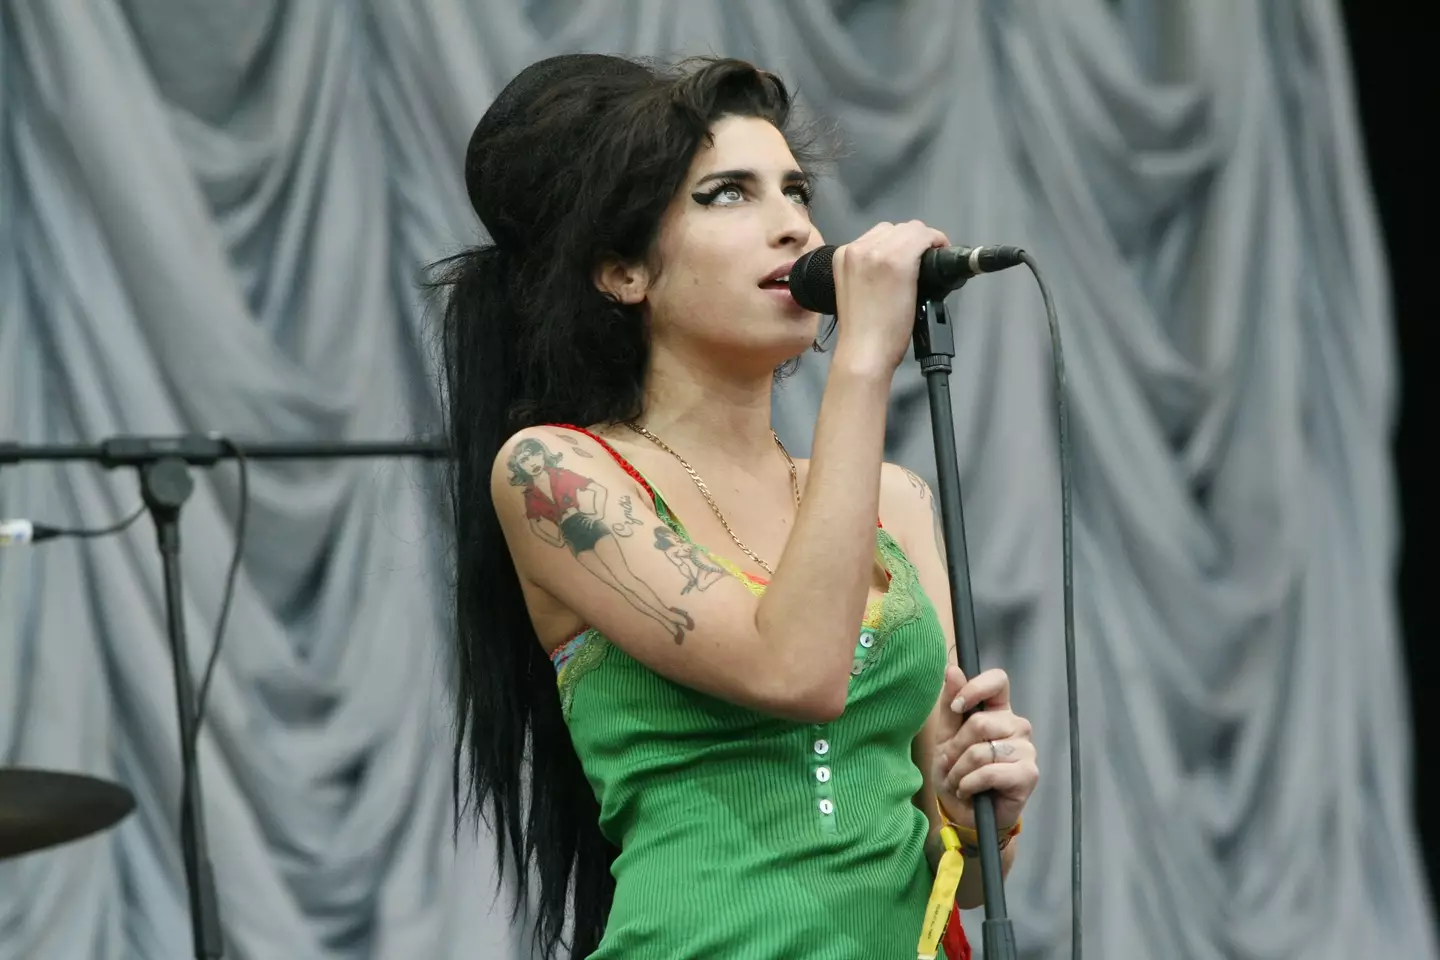 Amy Winehouse's personal struggles often overshadowed her singing career.